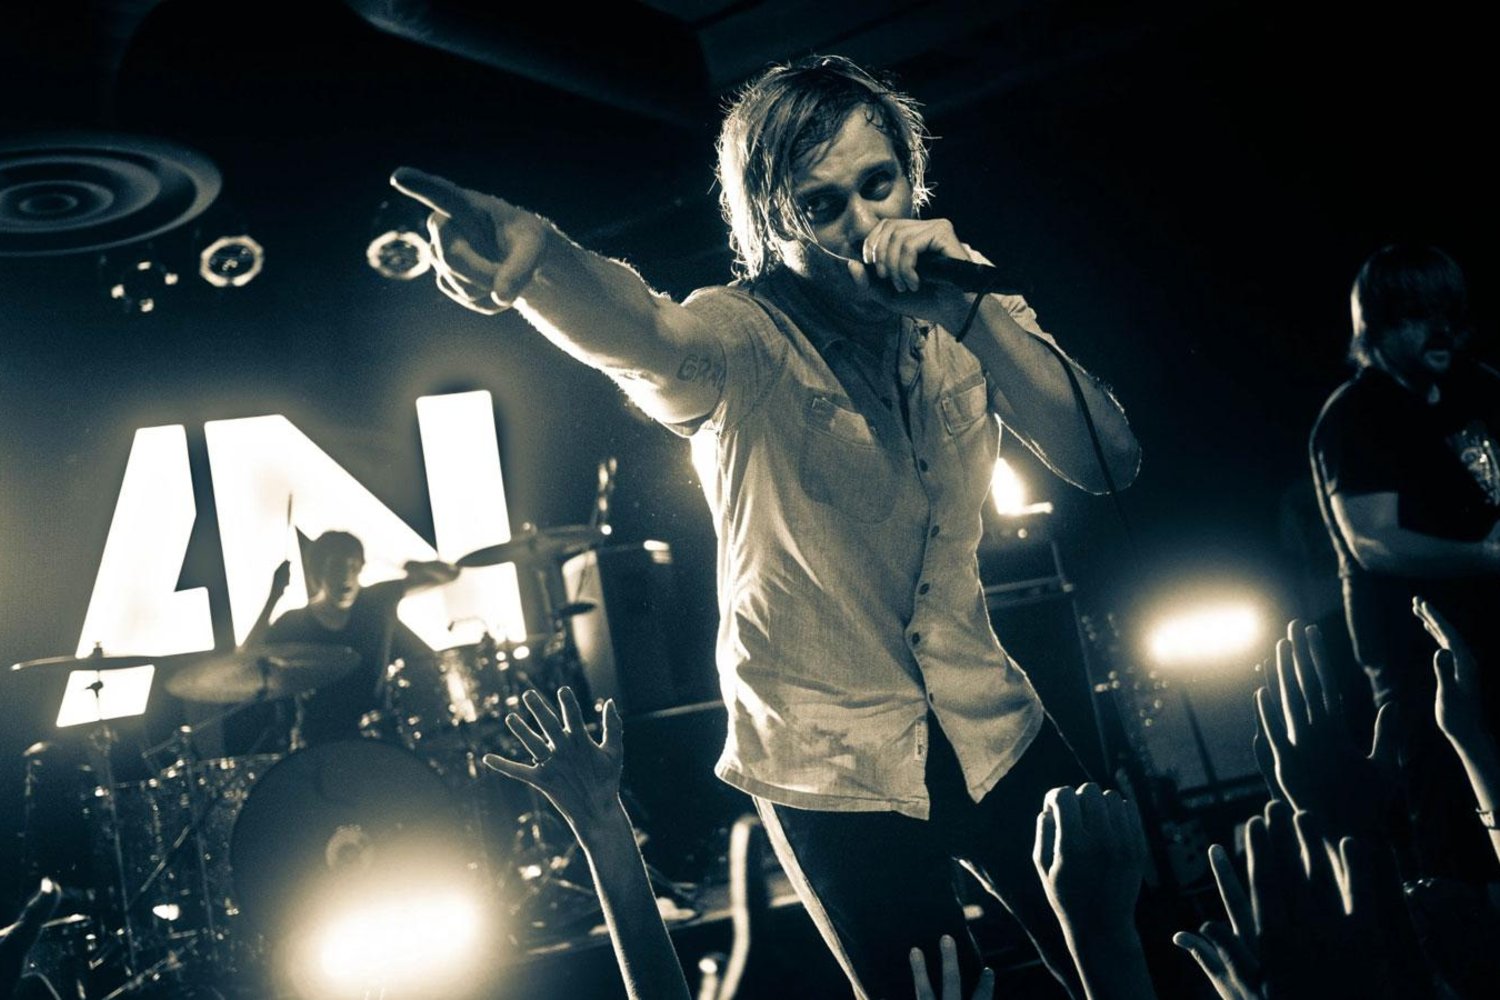 Awolnation Backgrounds, Compatible - PC, Mobile, Gadgets| 1500x1000 px